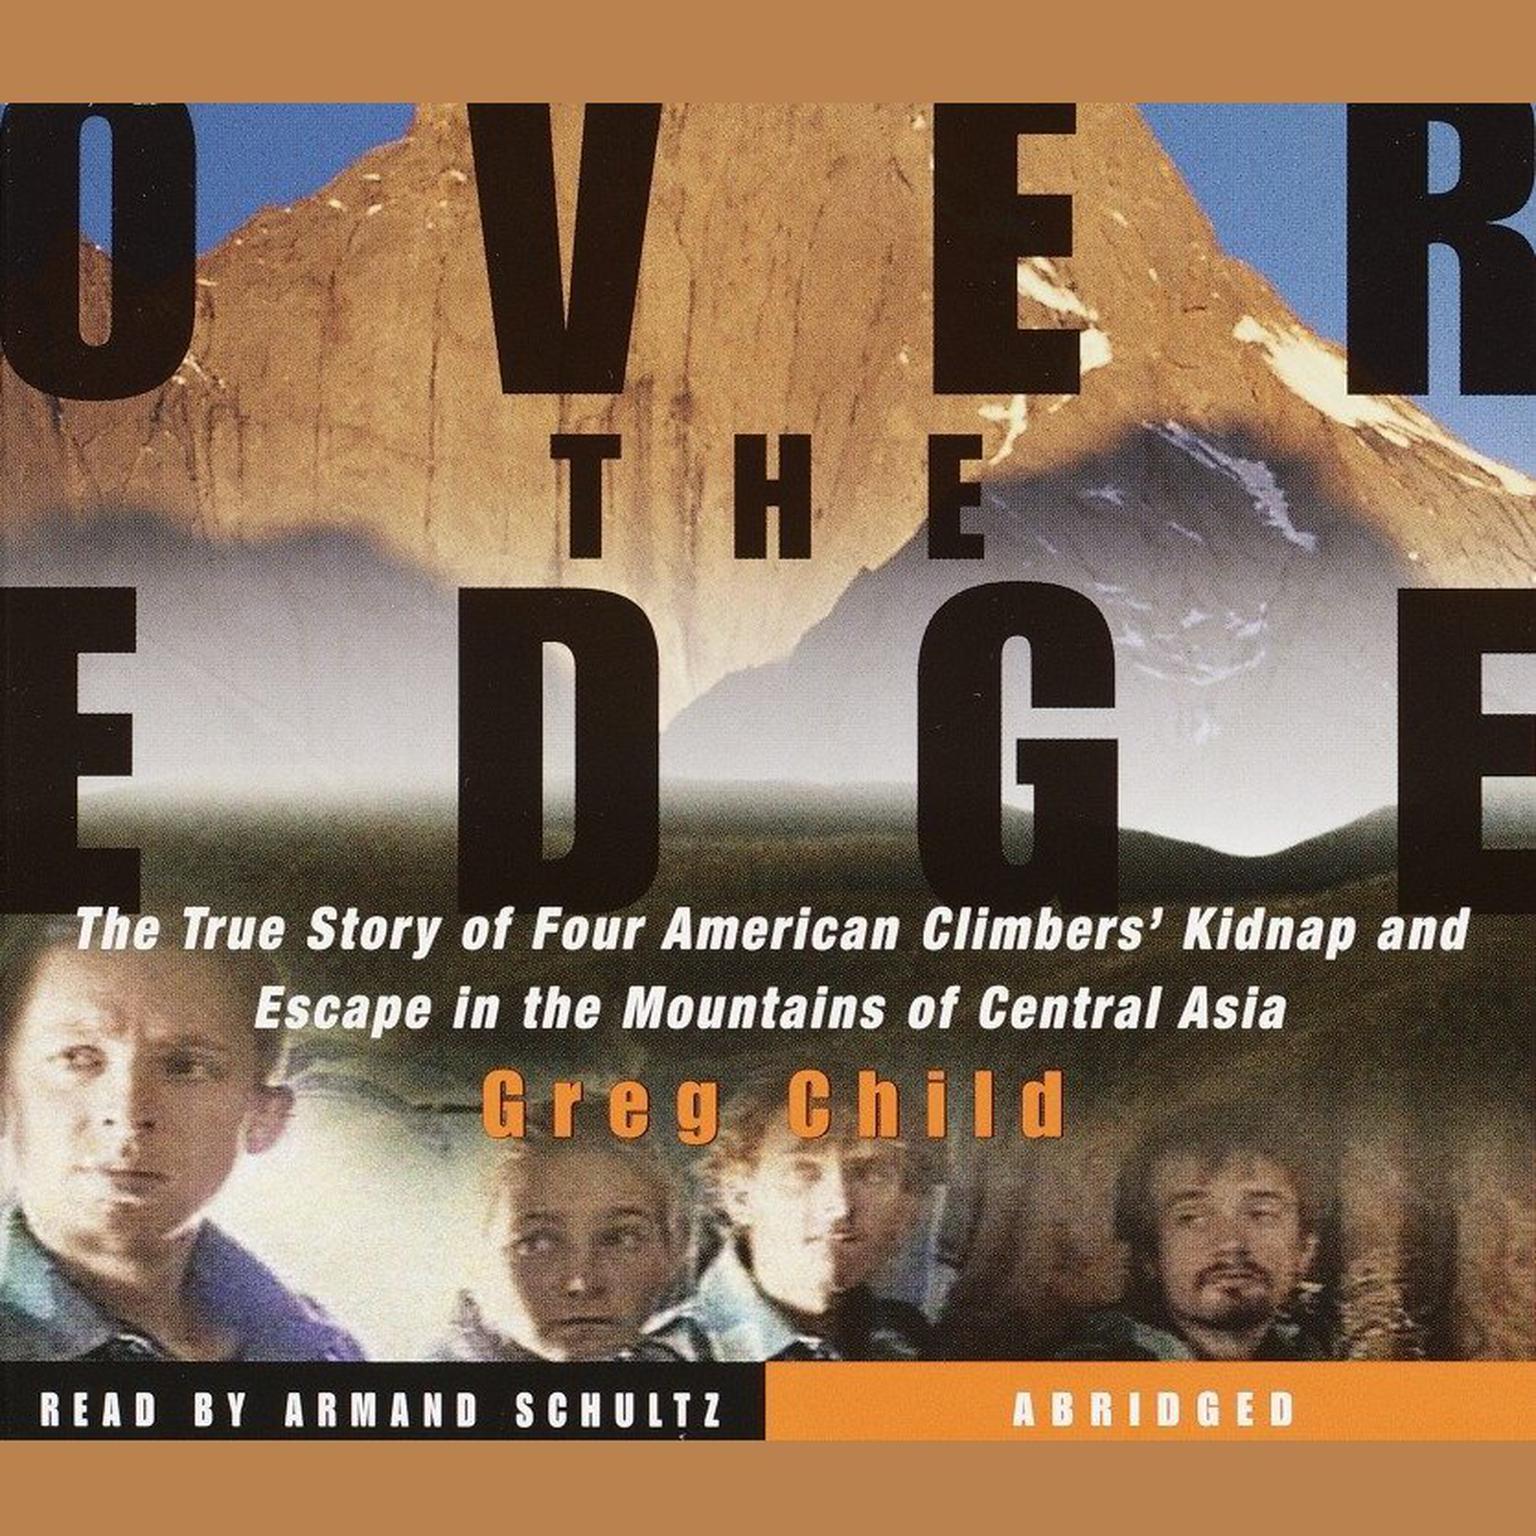 Over the Edge (Abridged): The True Story of Four American Climbers Kidnap and Escape in the Mountains of Central Asia Audiobook, by Greg Child